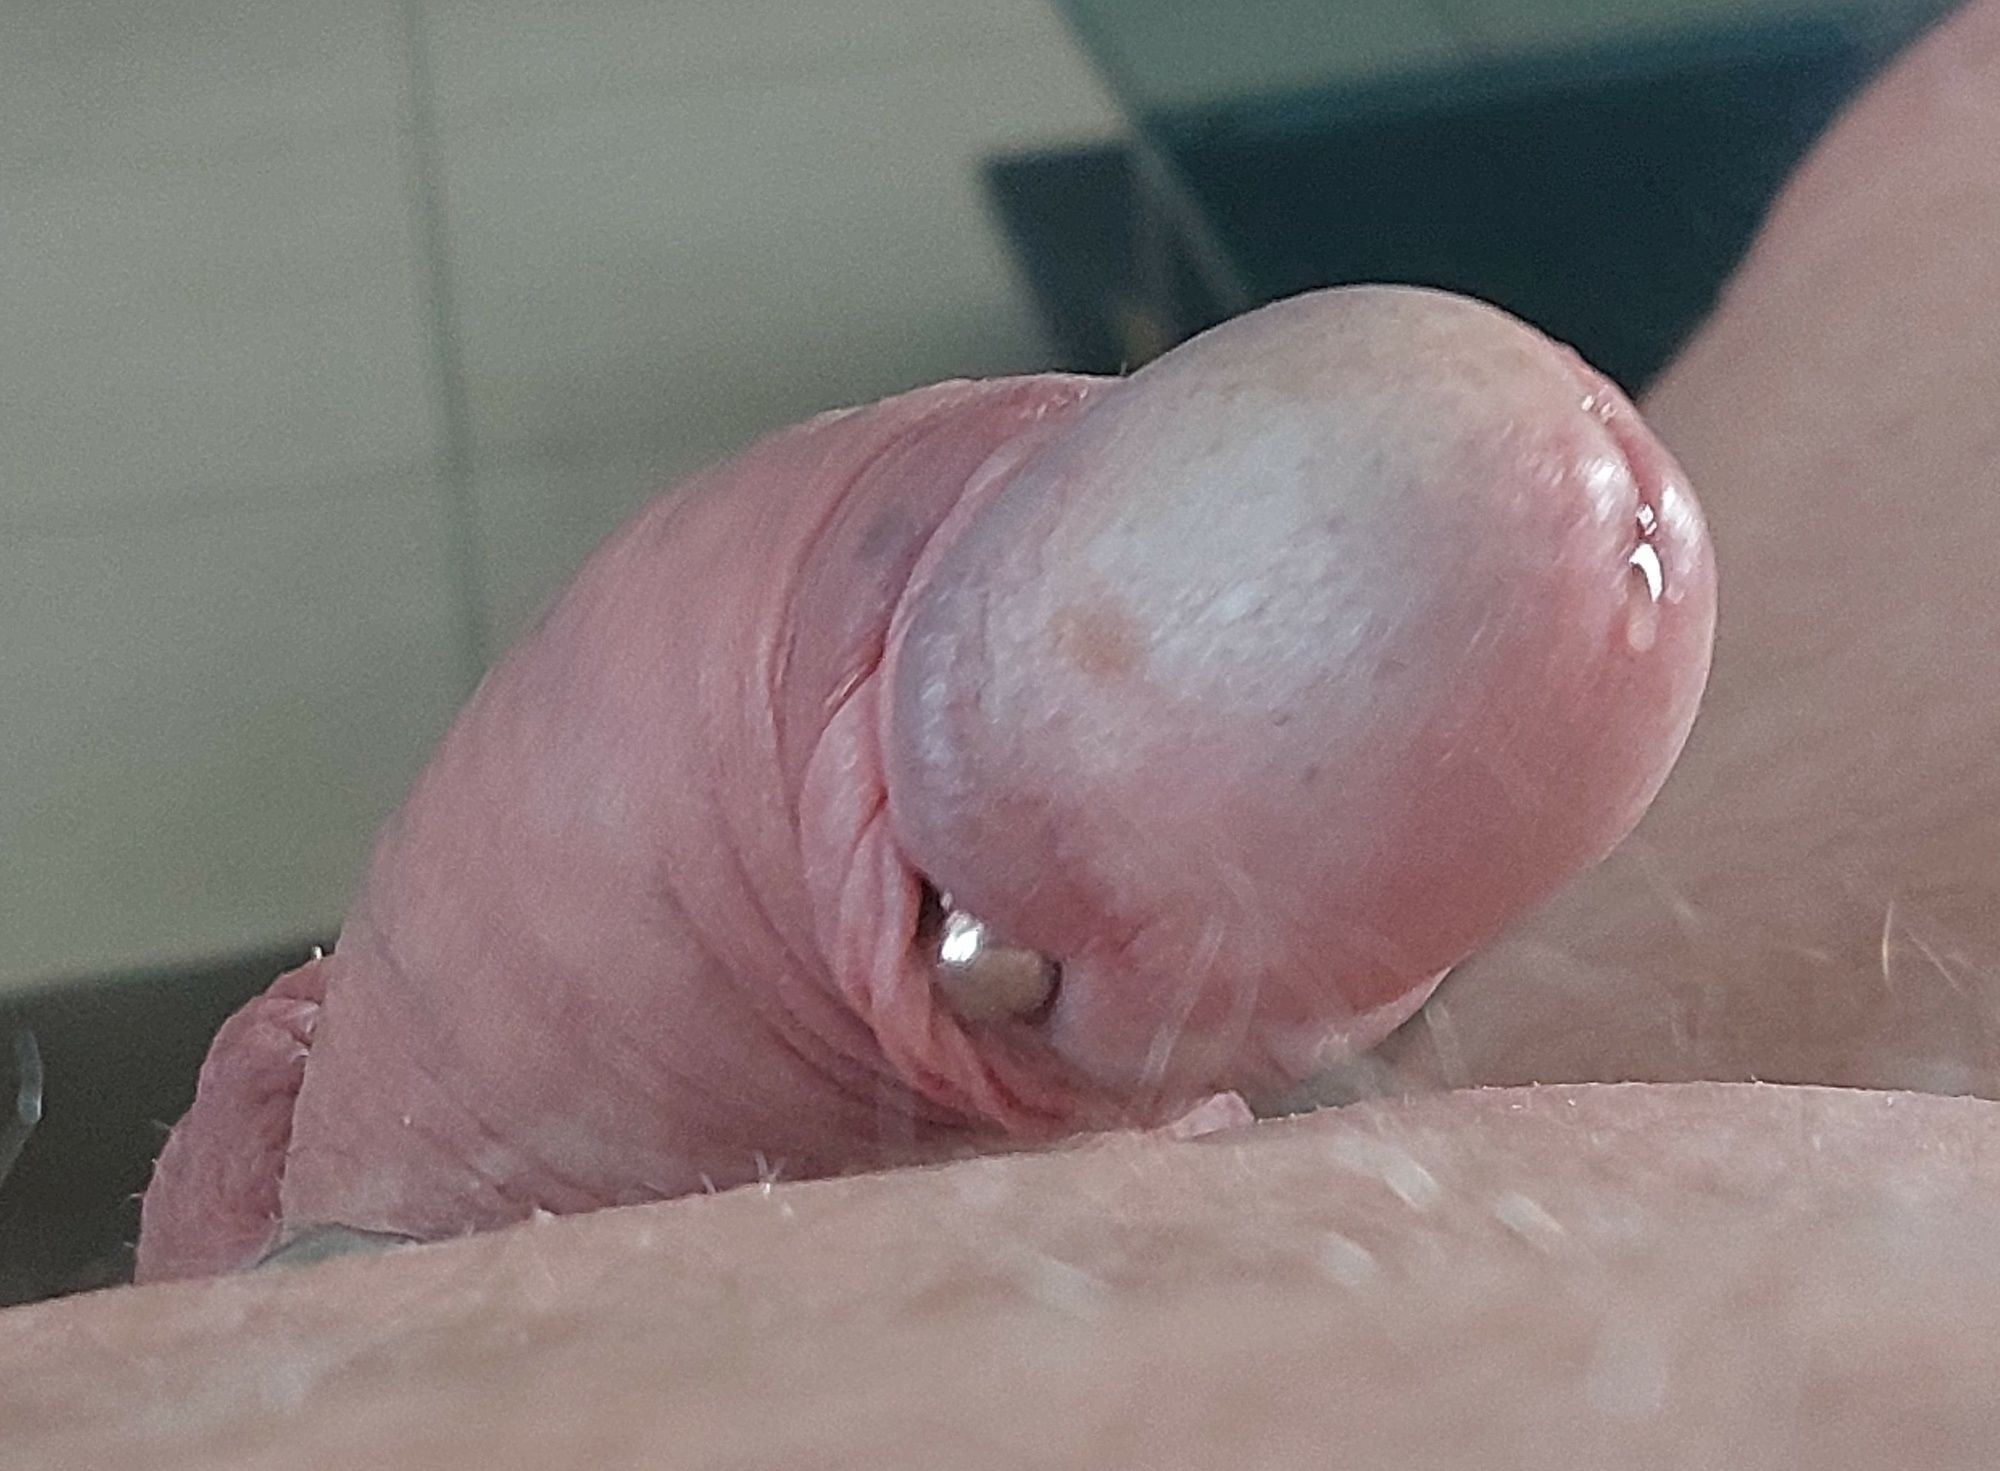 Small ringed dick